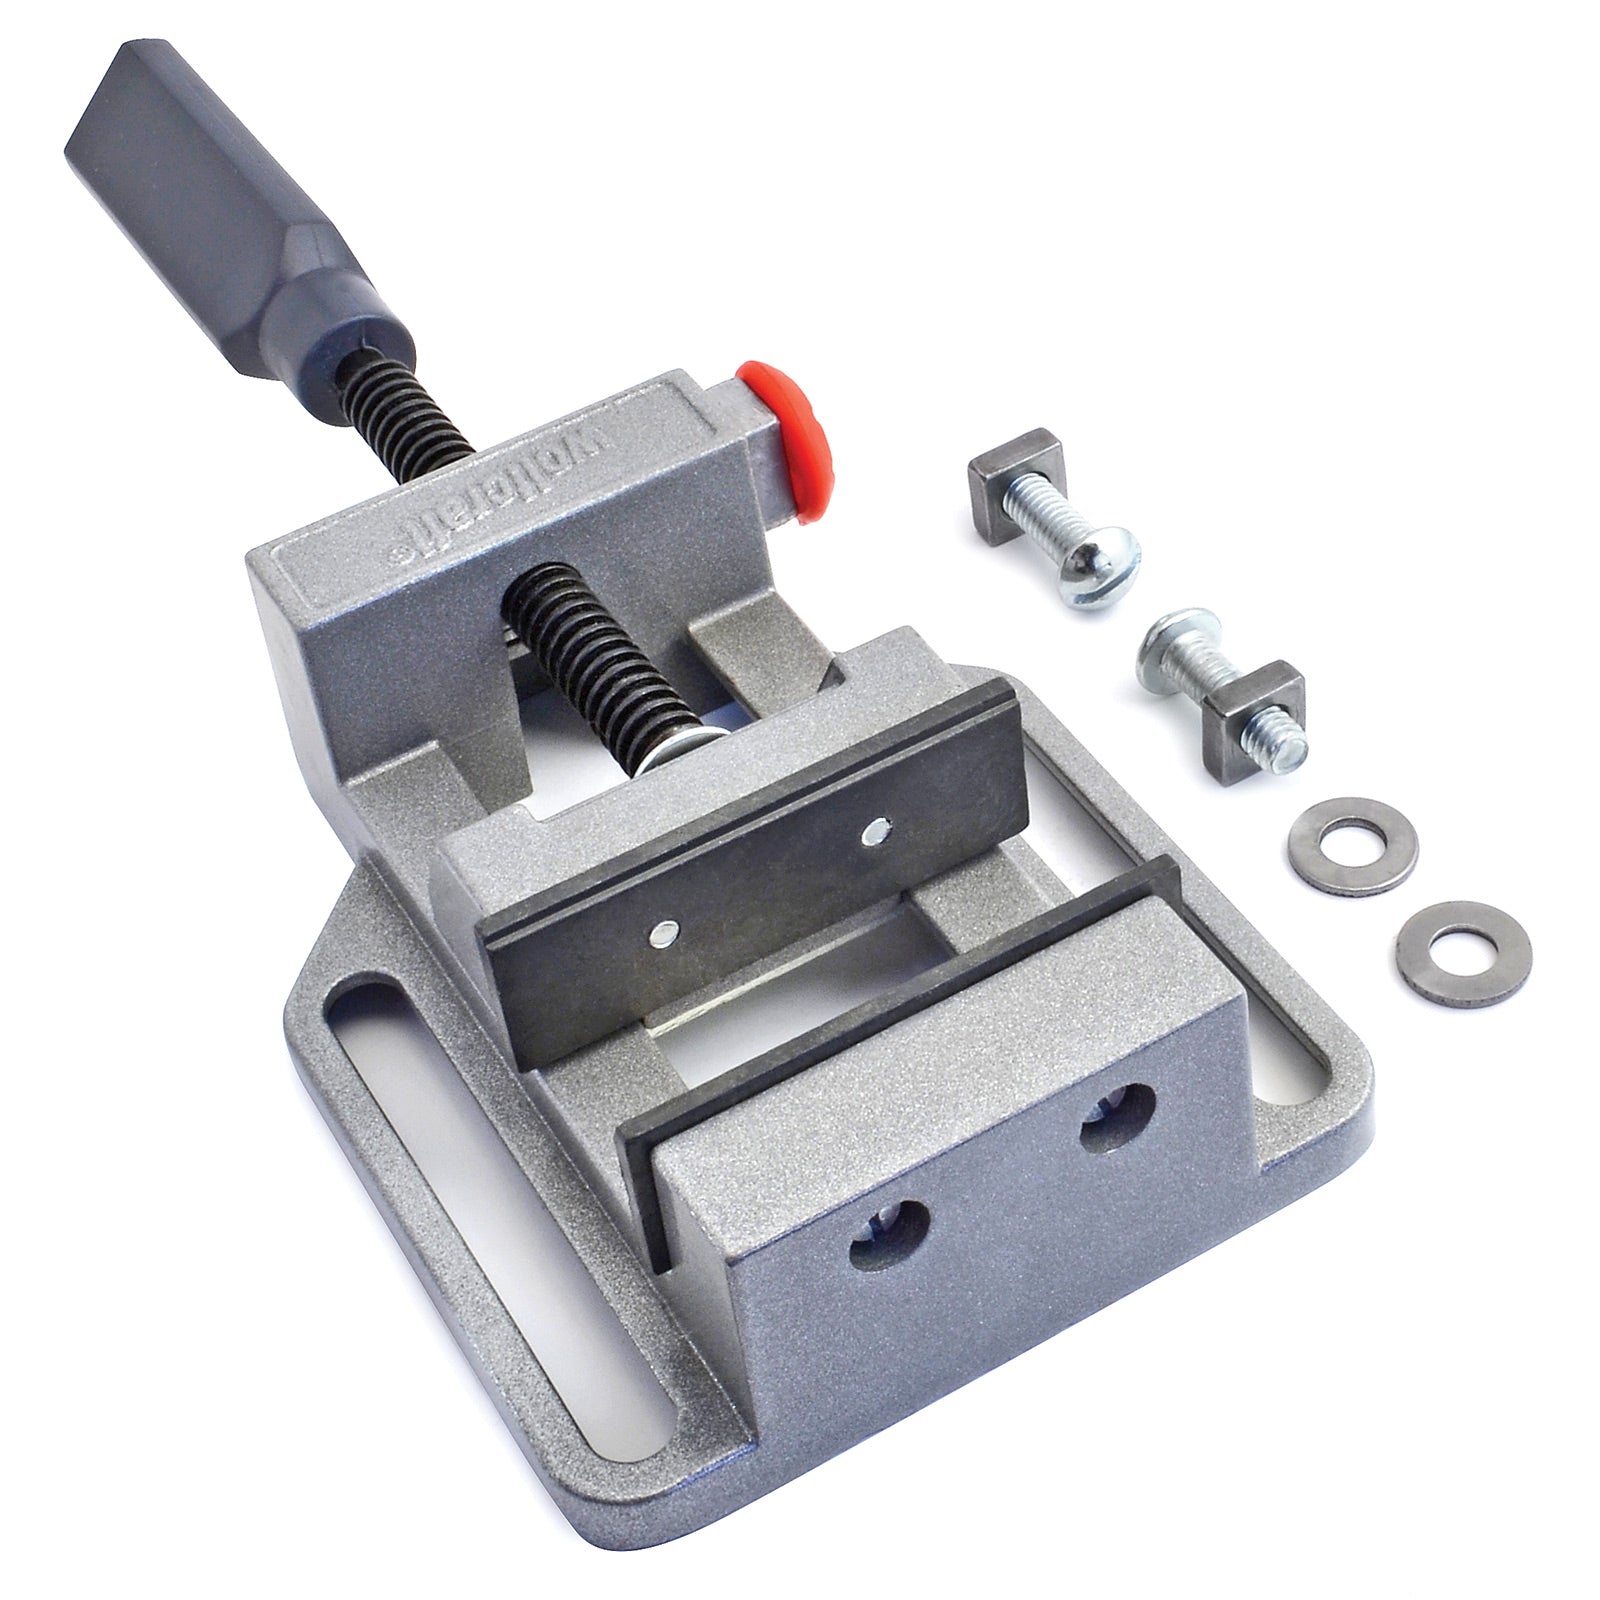 Quick - Jaw Vise, 2 - 3/4 Inch Capacity